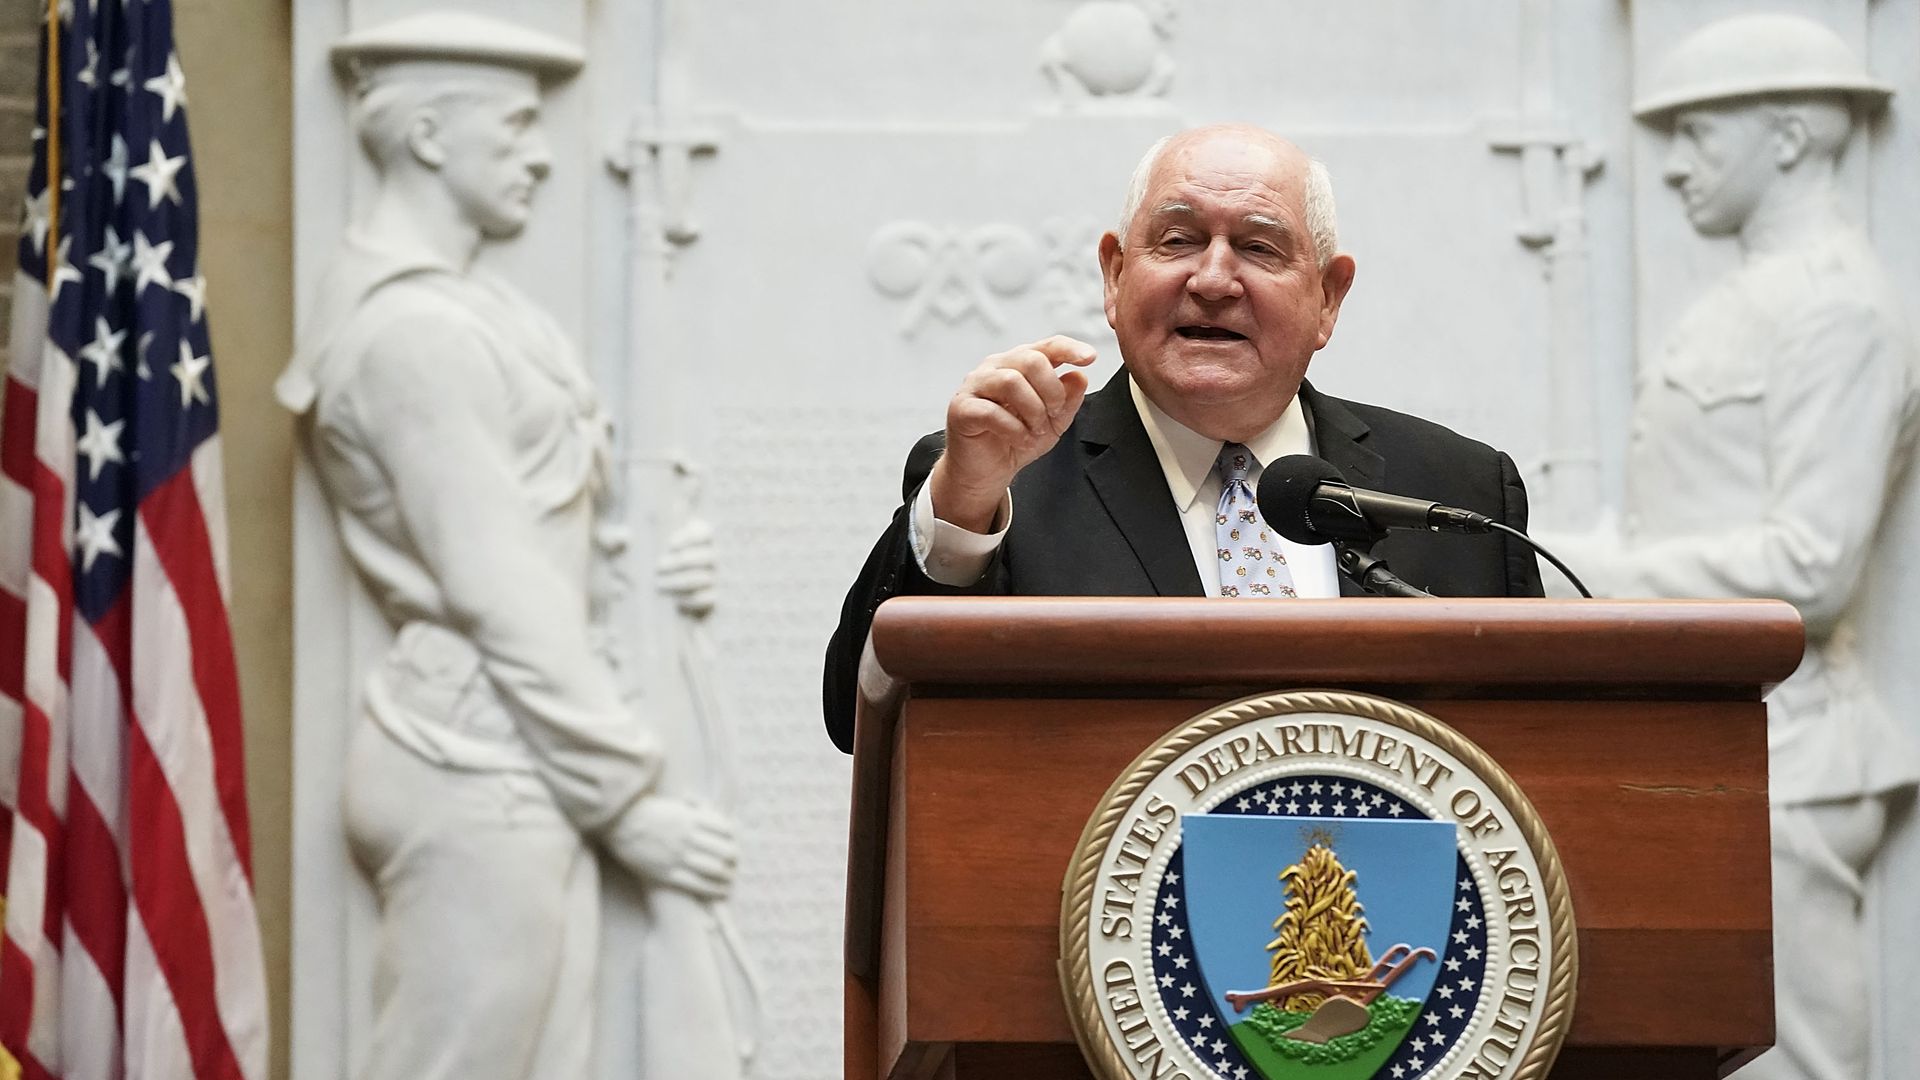 Secretary of Agriculture Sonny Perdue speaks during a forum April 18, 2018 in Washington, DC.